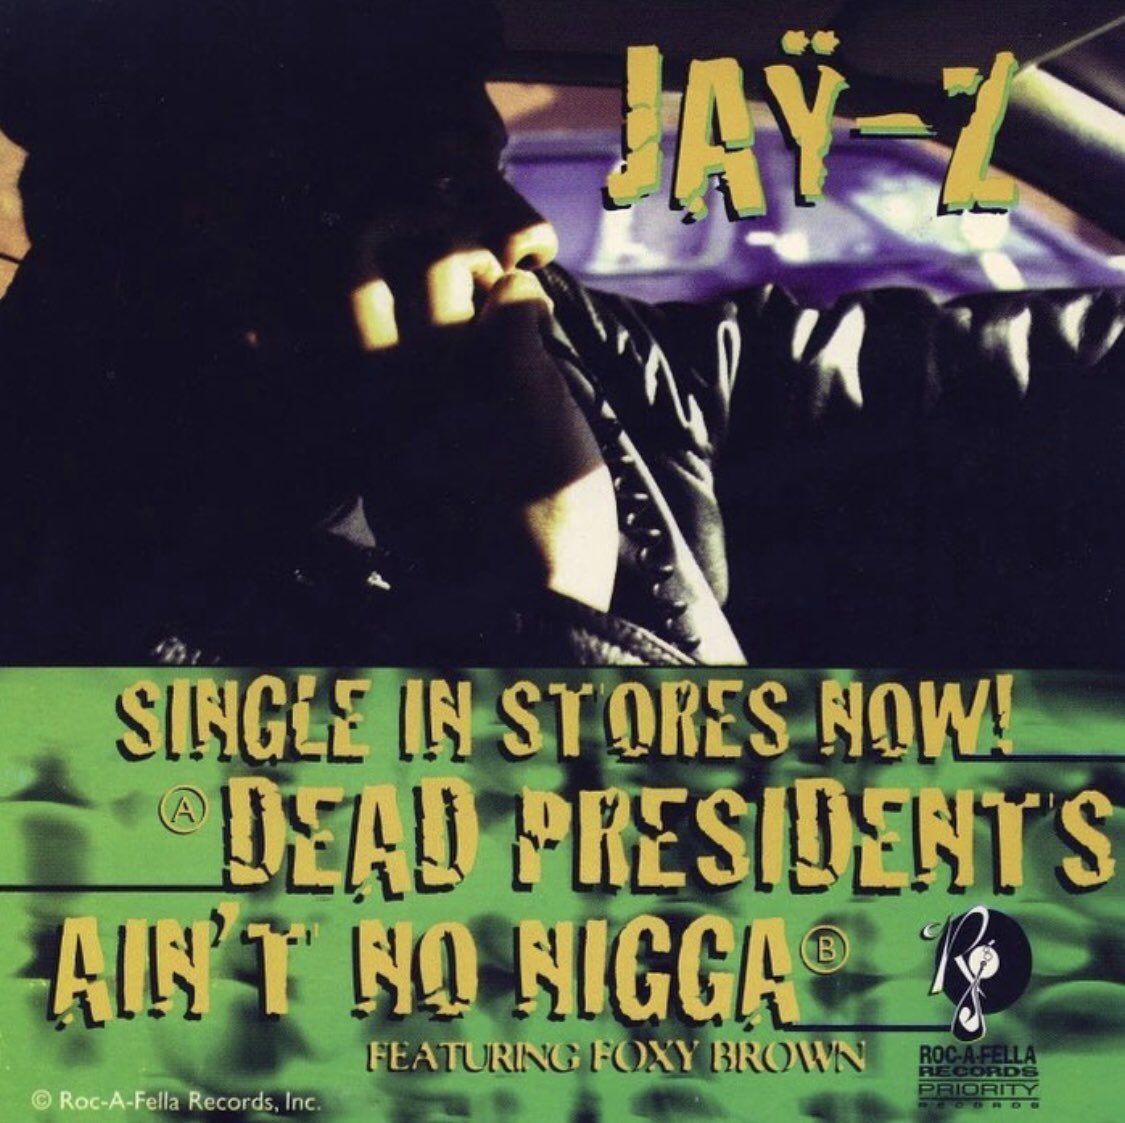 February 1996, JayZ “officially” releases “Dead Presidents”, the 1st single off Reasonable Doubt. The song gains regular airplay on MTV & BET becoming JayZ’s 1st gold single (500k copies sold) by June 96.